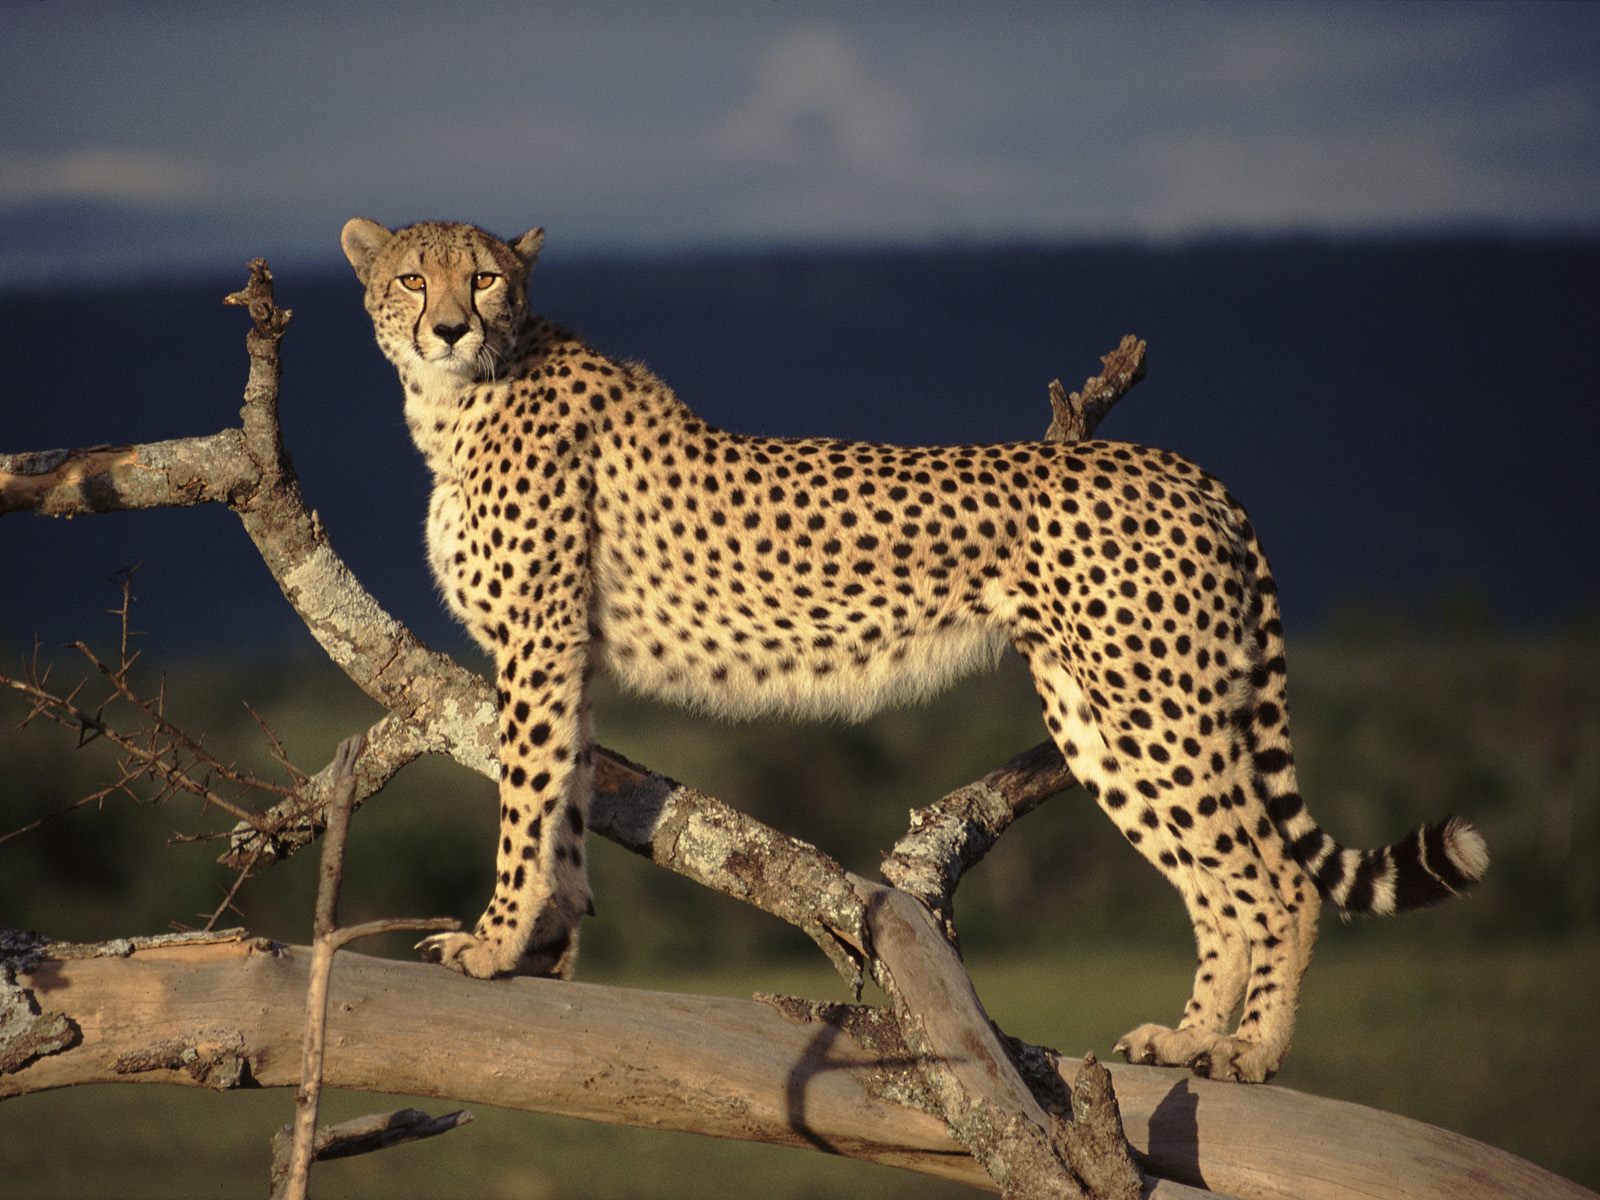 Cheetahs cannot climb trees and have poor night vision.